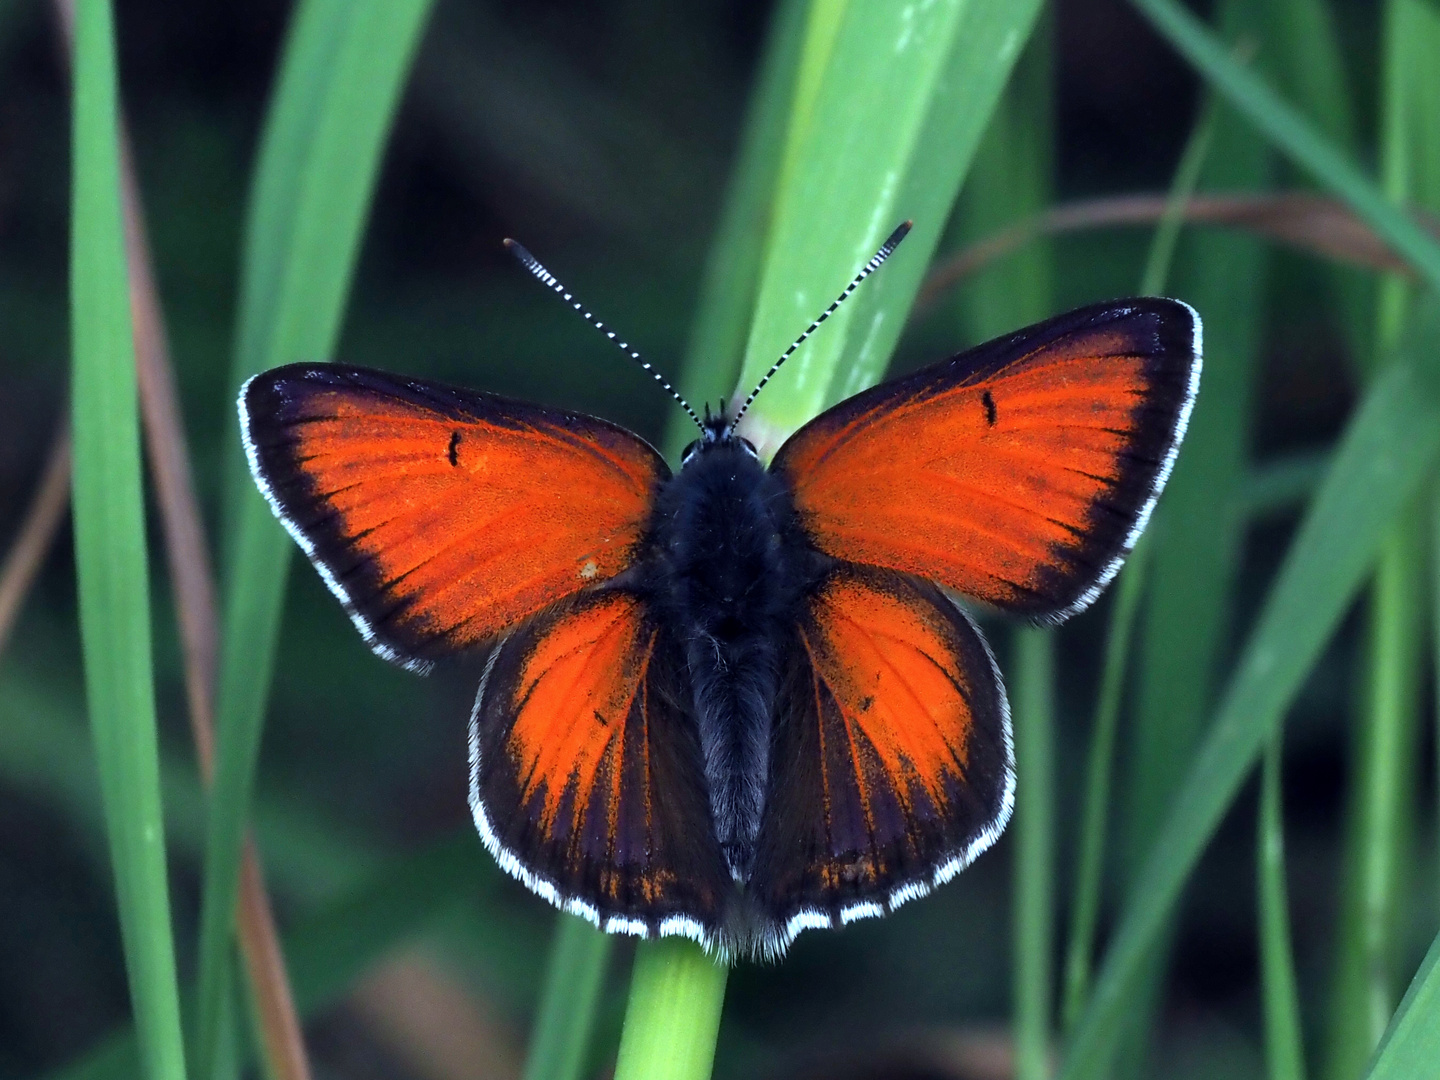 Lilagold - Feuerfalter (Lycaena hippothoe)